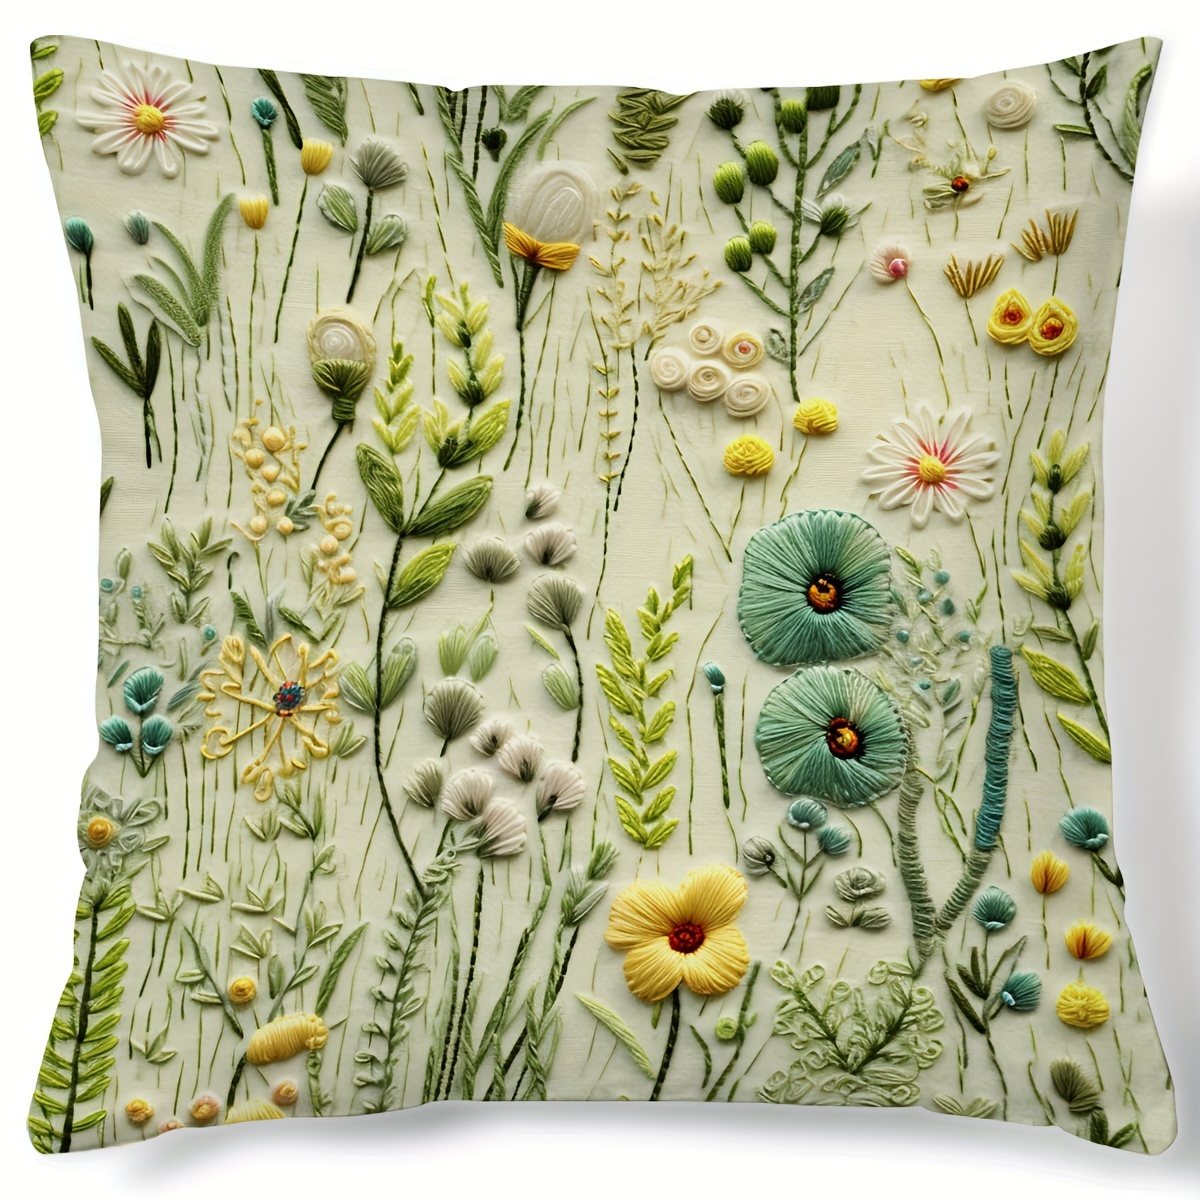 

1pc Contemporary Style Floral Digital Print Cushion Cover 45cm/17.7inch, Botanical Garden Pattern Decorative Pillow Case For Home Decor